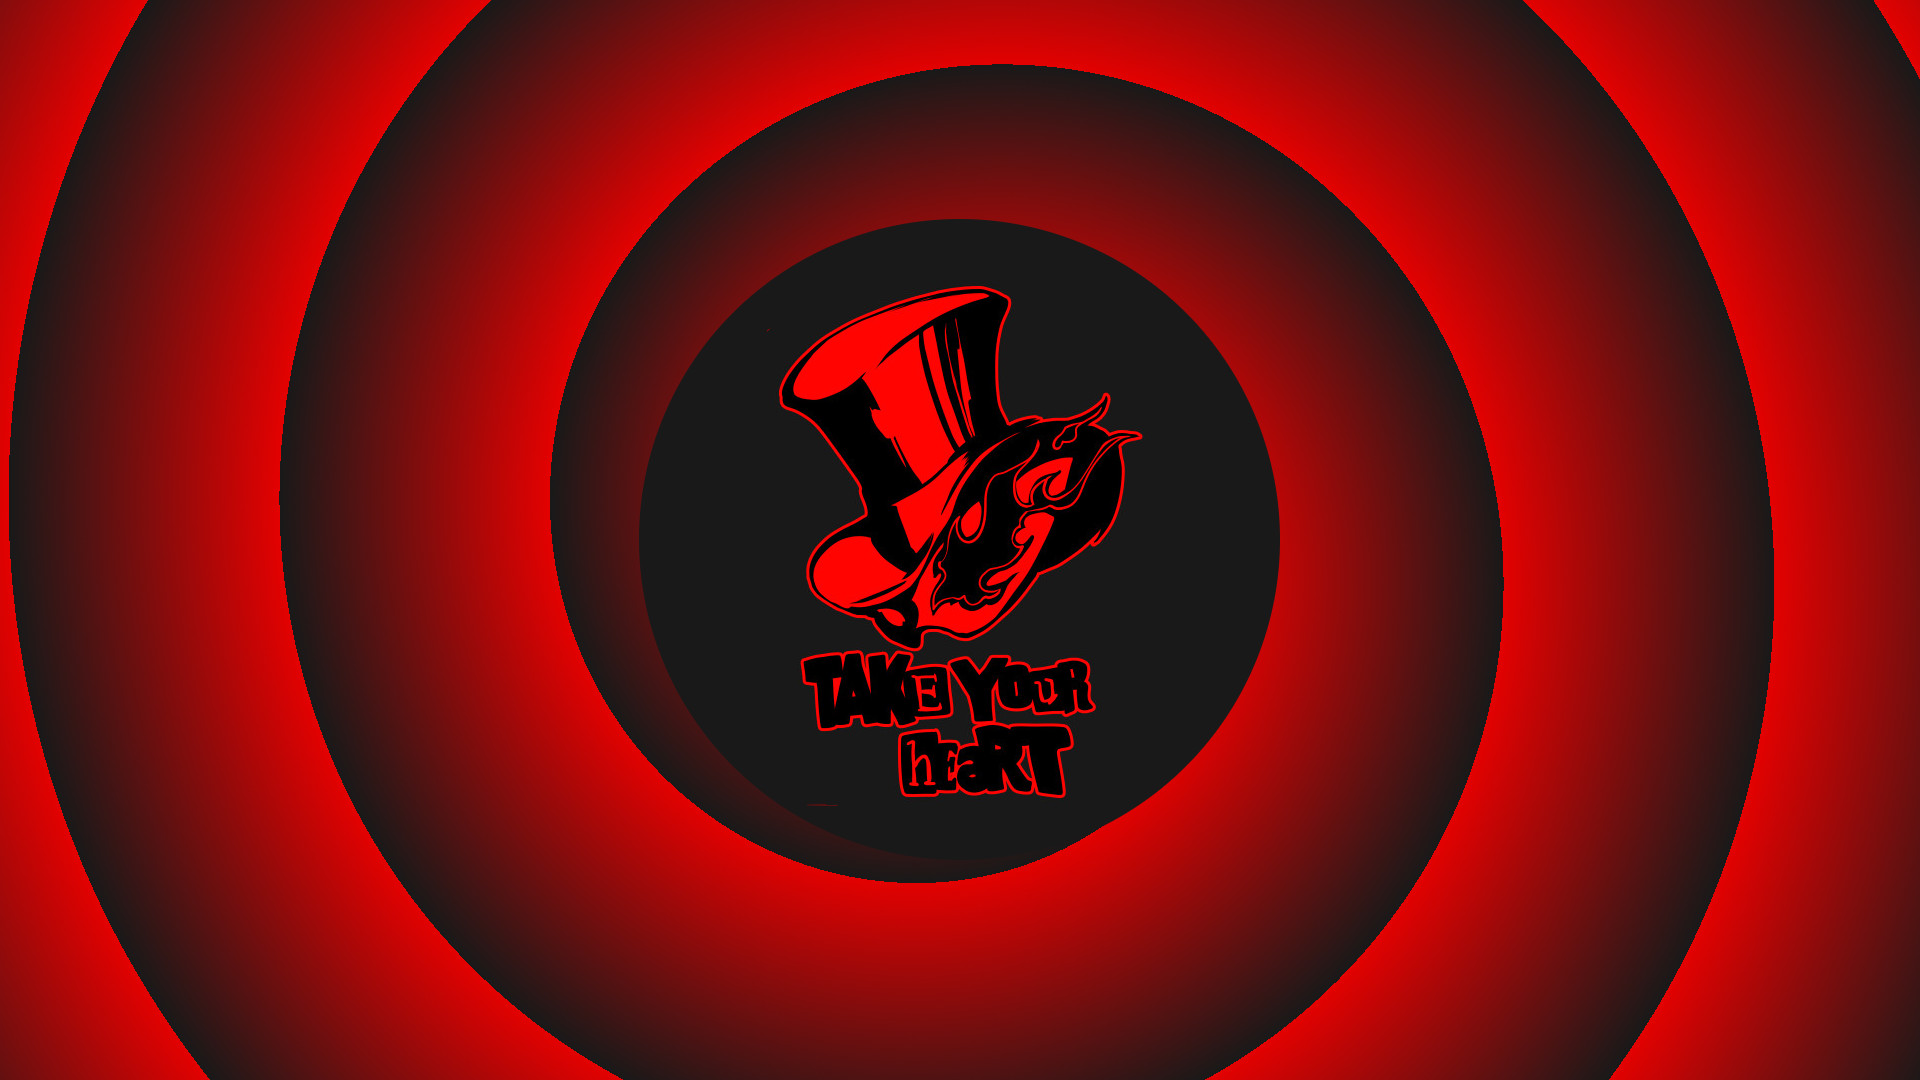 1920x1080 ... Persona 5 - Take Your Heart PC Wallpaper by thesquidaddict